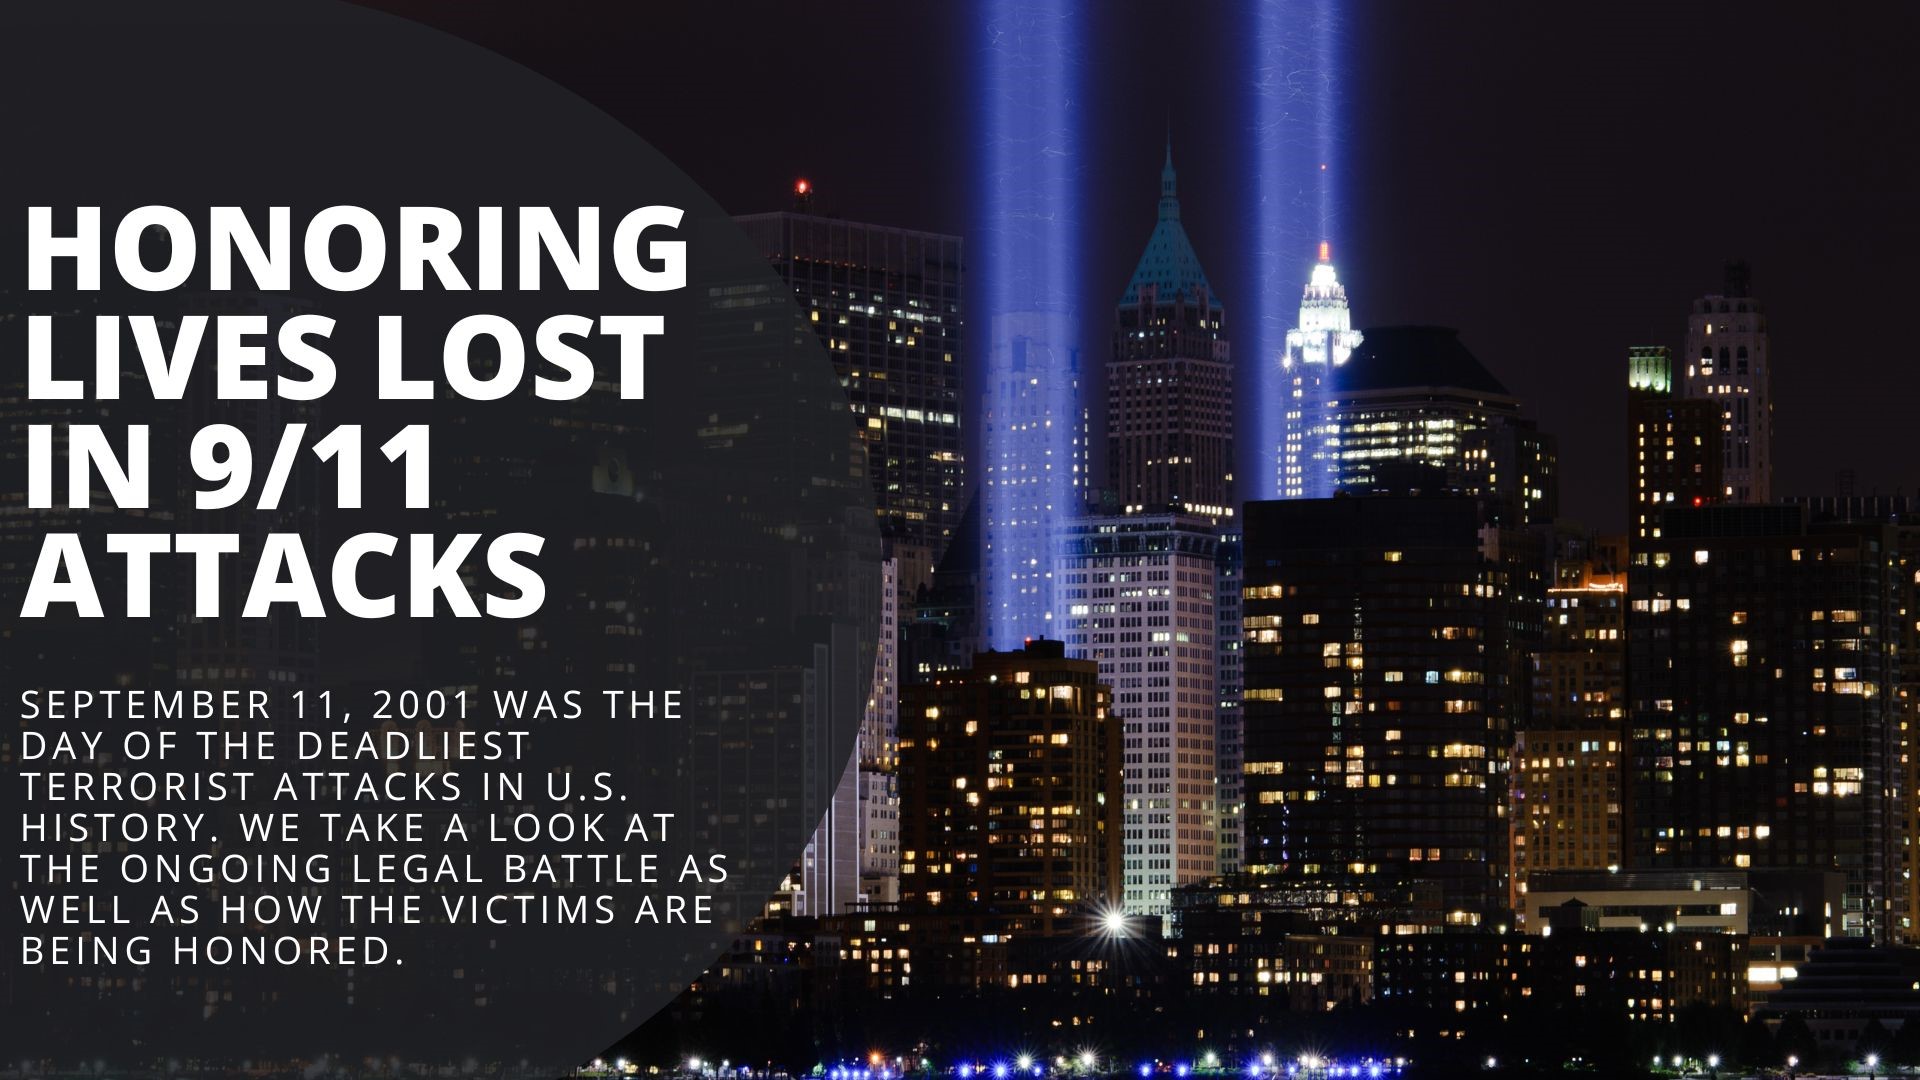 September 11, 2001 was the day of the deadliest terrorist attacks in U.S. history. We take a look at the ongoing legal battle, plus how victims are being honored.